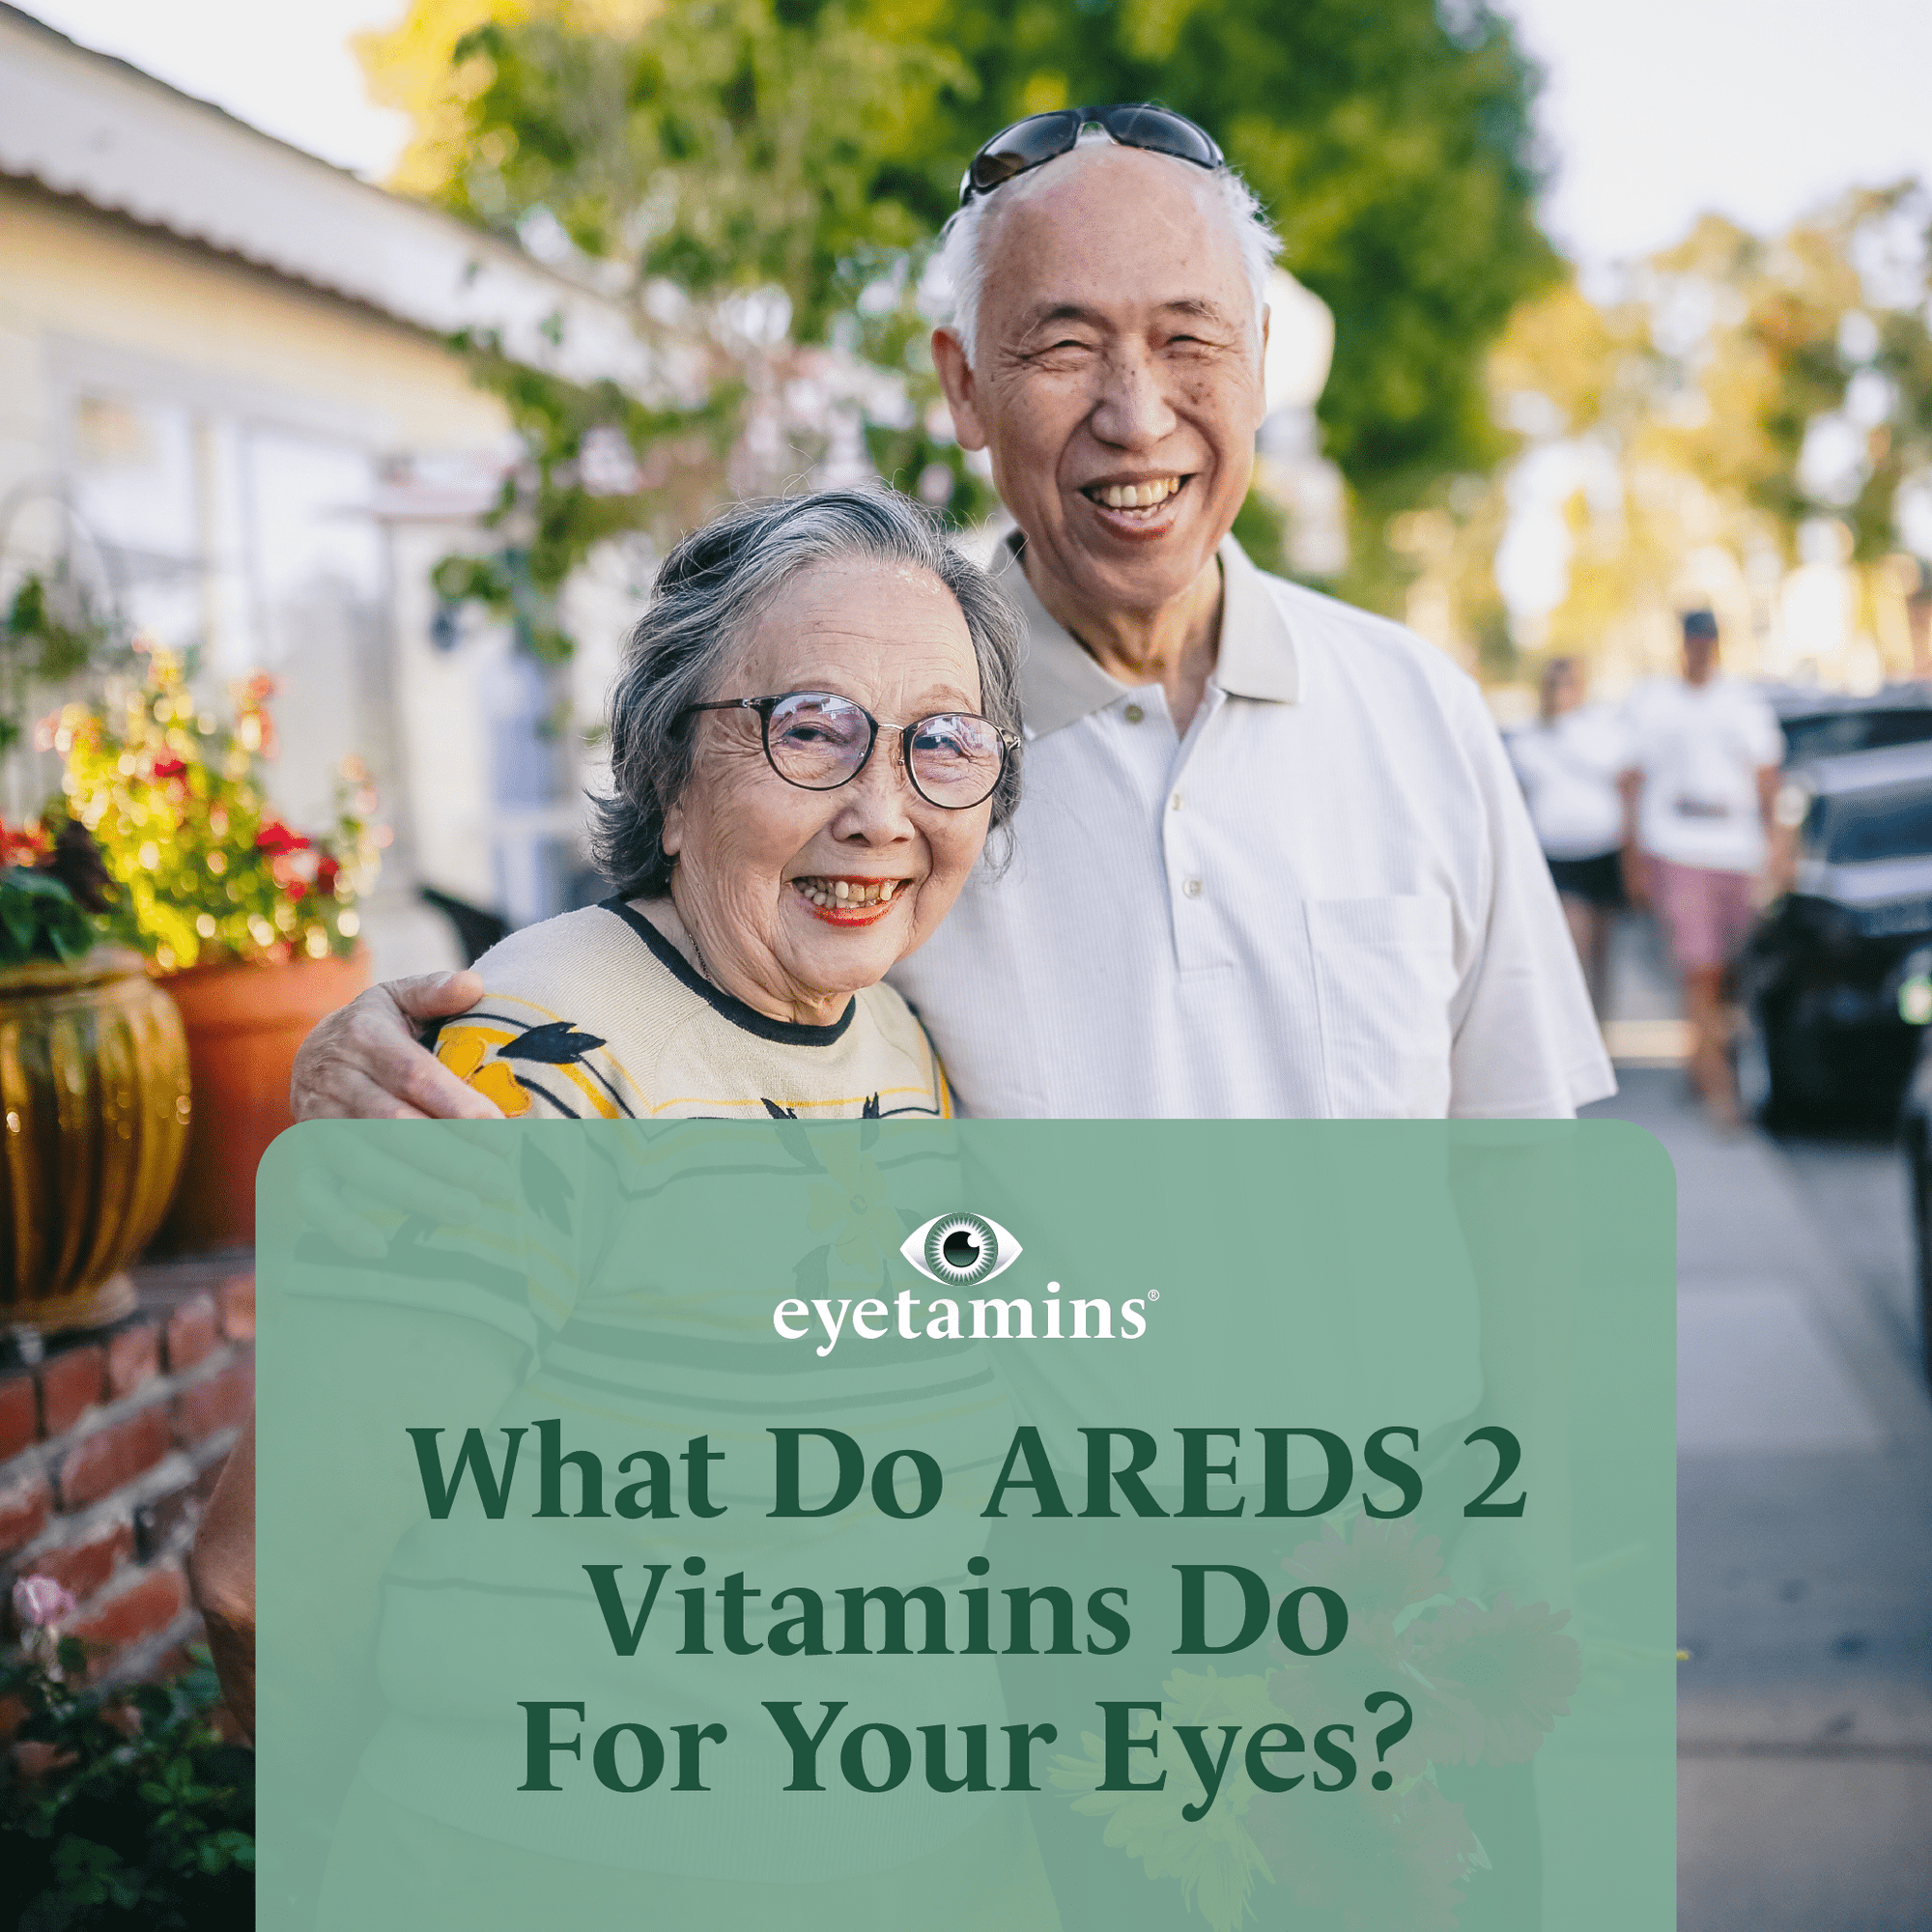 Eyetamins - What Do AREDS 2 Vitamins Do For Your Eyes?